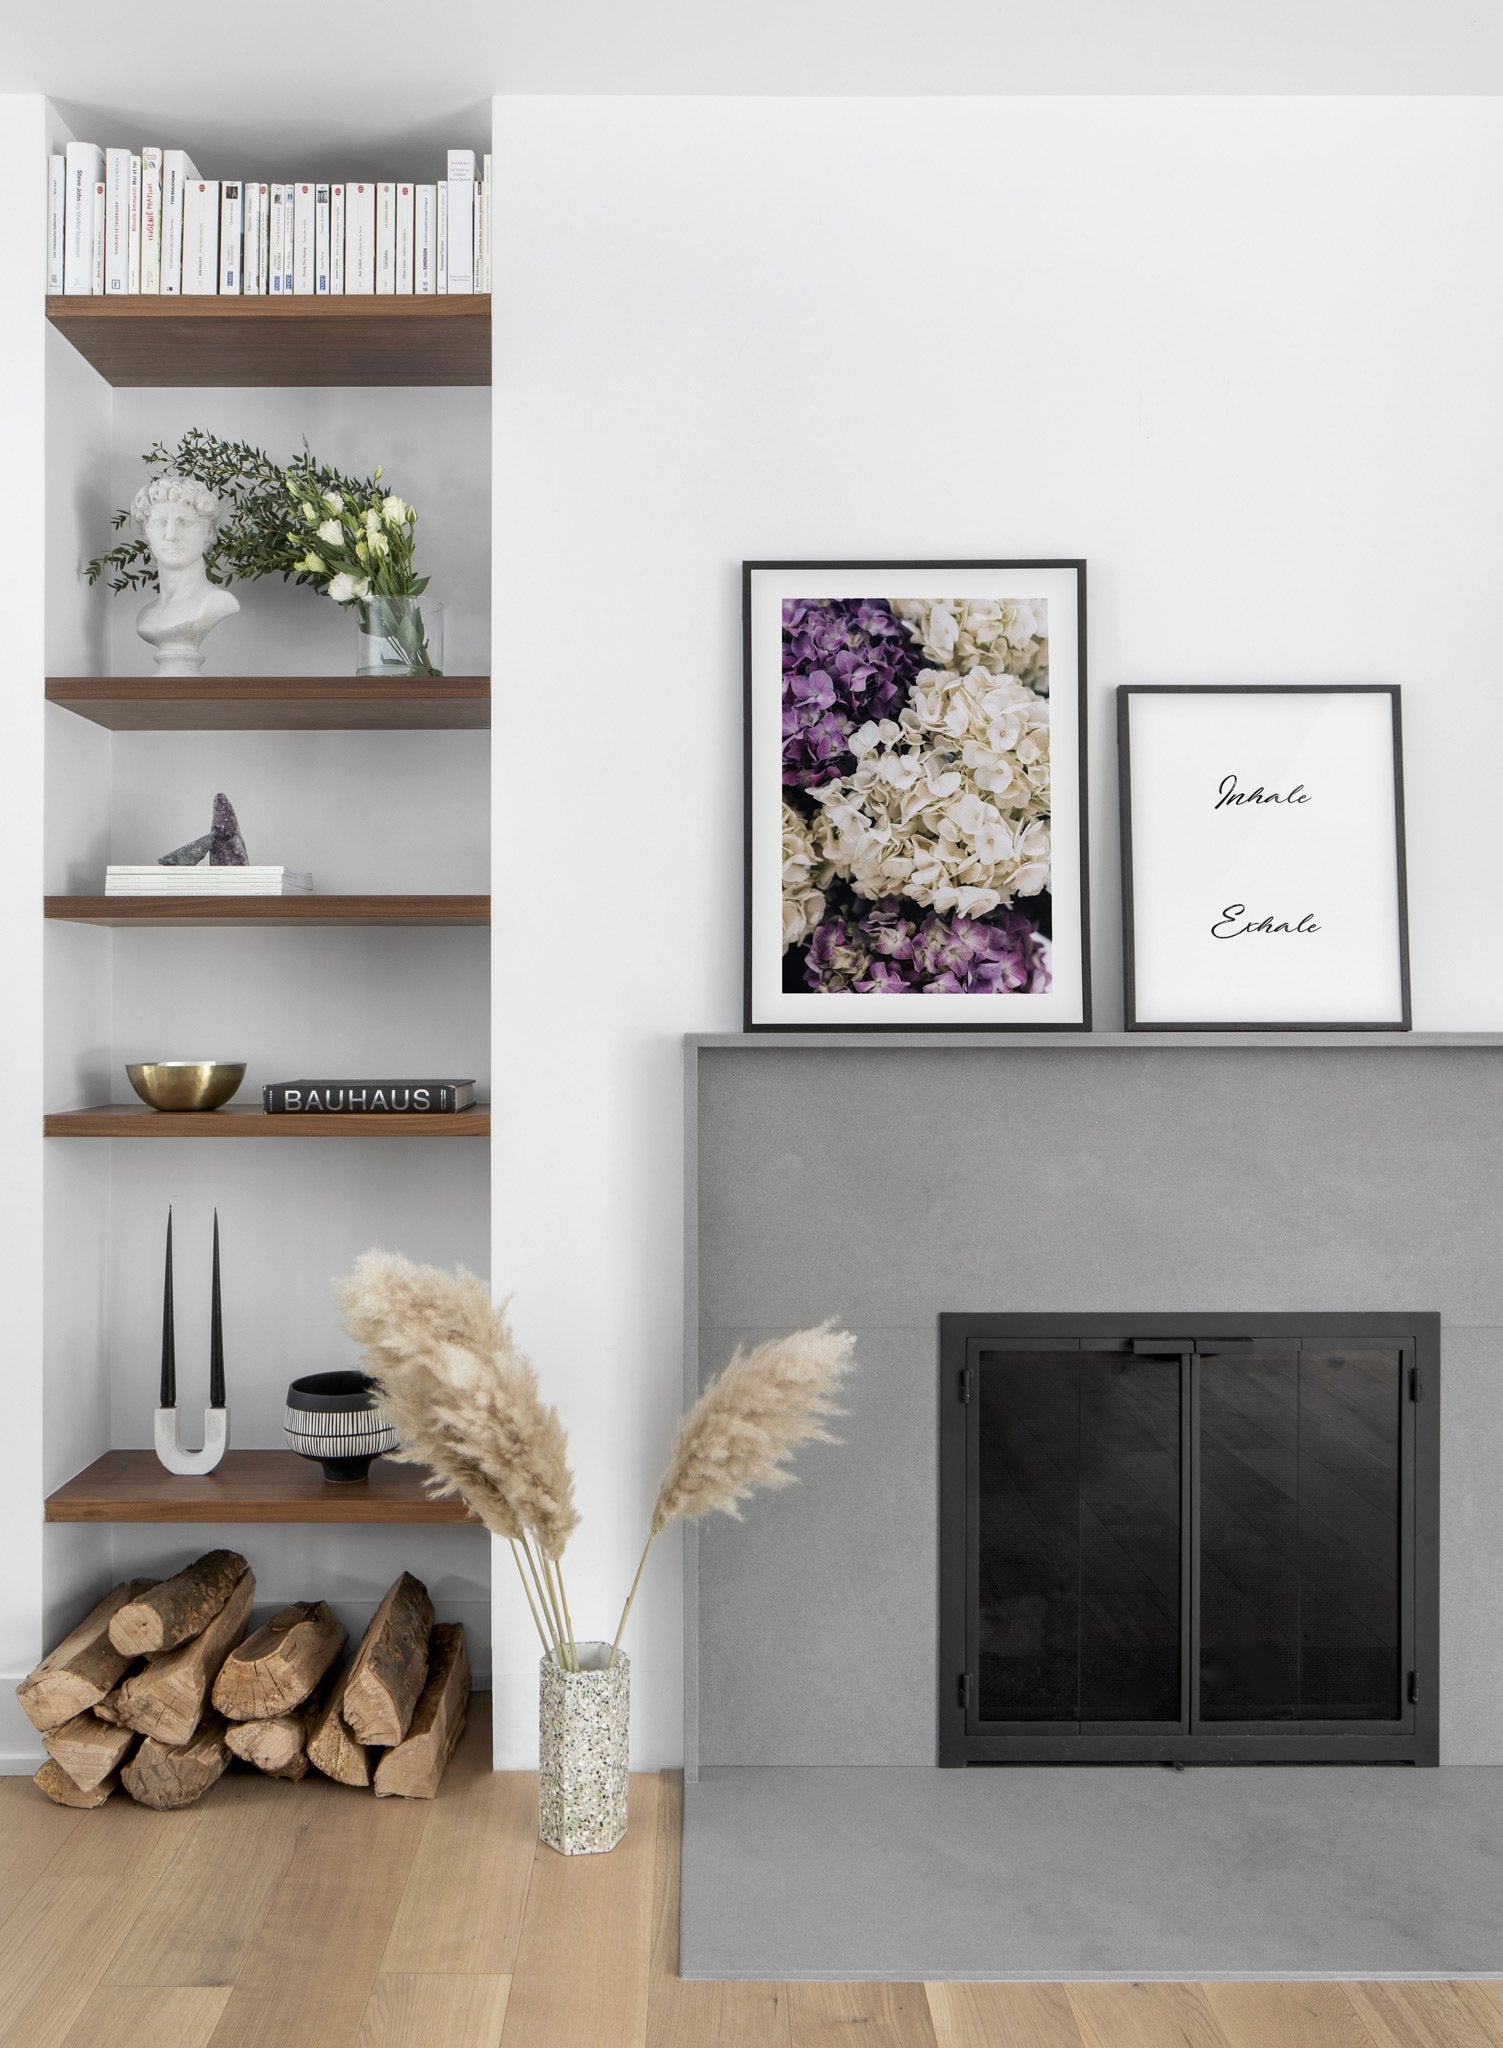 Minimalist wall art poster duo featuring purple hydrangeas floral photography - Fireplace